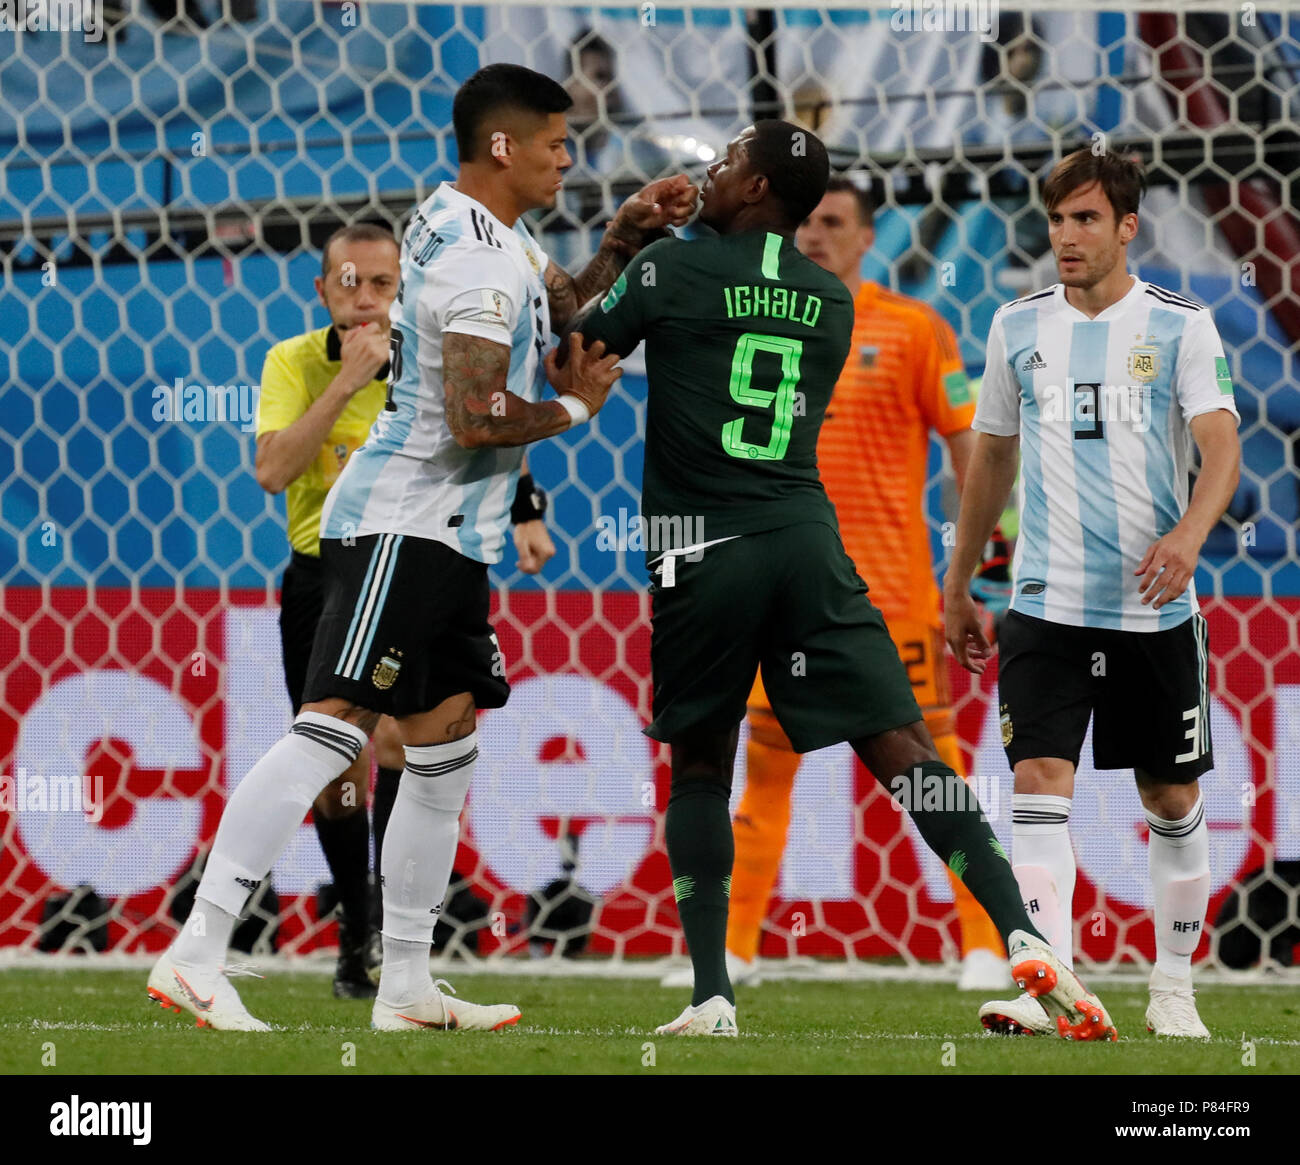 SAINT PETERSBURG, RUSSIA - JUNE 26: Odion Ighalo (N9) of Nigeria national team and Marcos Rojo of Argentina national team during the 2018 FIFA World Cup Russia group D match between Nigeria and Argentina at Saint Petersburg Stadium on June 26, 2018 in Saint Petersburg, Russia. (MB Media) Stock Photo